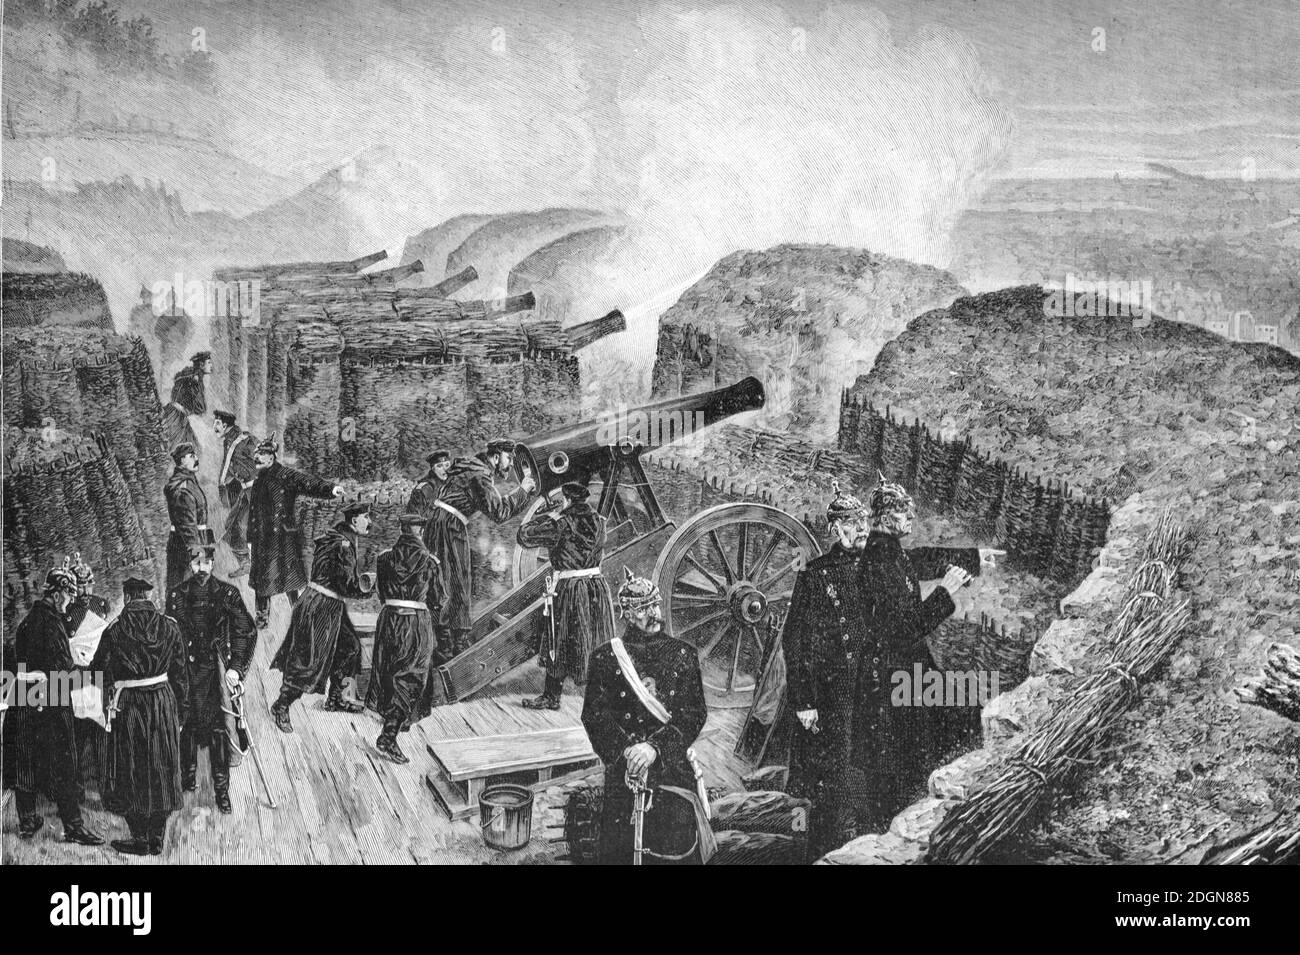 Siege of Paris 1870-1871 by Prussian Forces Commanded by Helmuth von Moltke the Elder during the Franco-Prussian War (Engr 1896) Vintage Engraving or Illustration Stock Photo